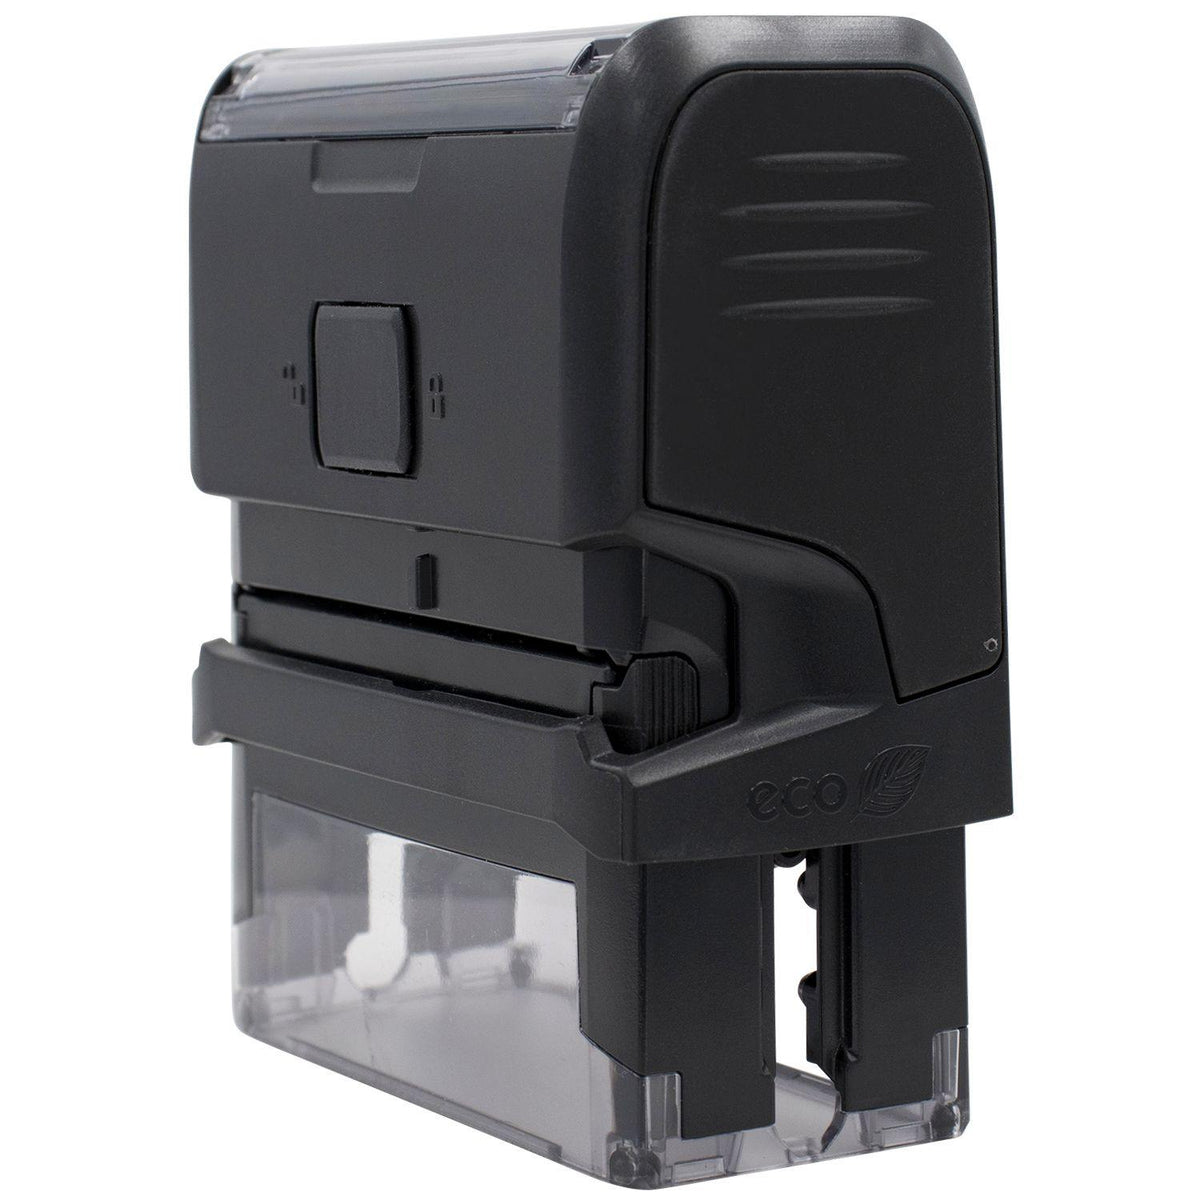 Large Self-Inking No Aceptamos Devolucions Stamp - Engineer Seal Stamps - Brand_Trodat, Impression Size_Large, Stamp Type_Self-Inking Stamp, Type of Use_General, Type of Use_Office